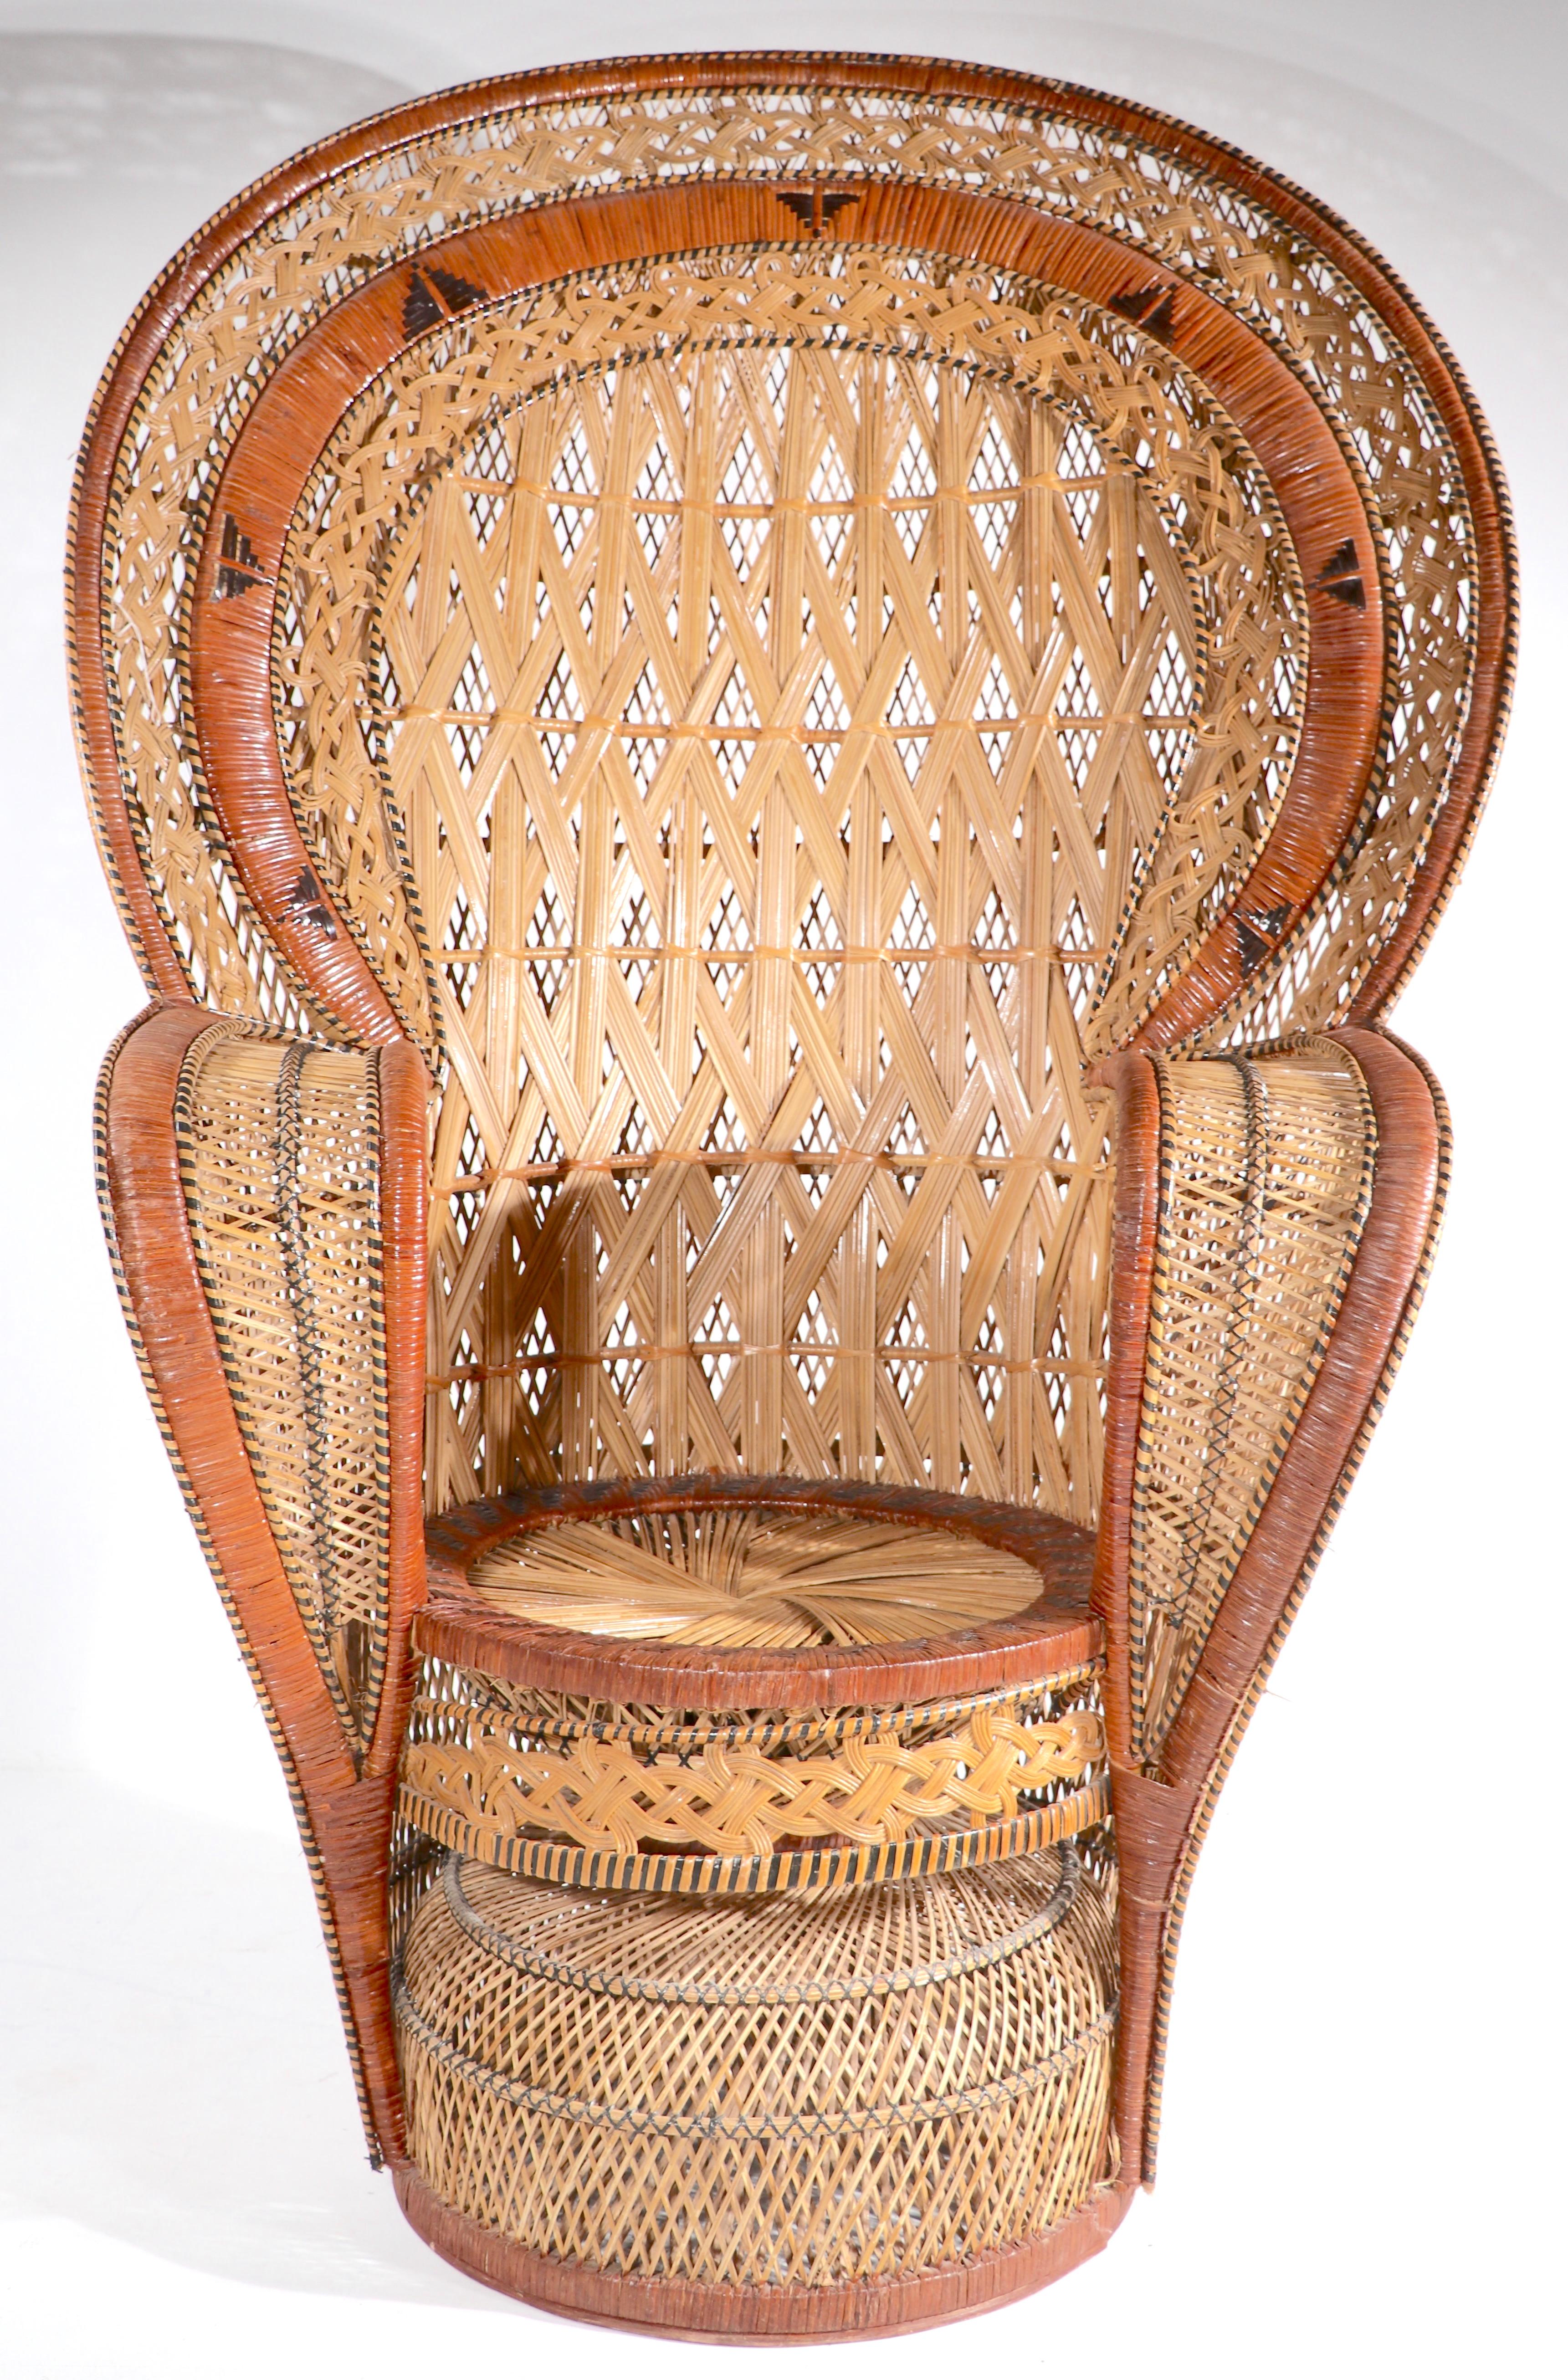 Exceptional wicker peacock chair, having an unusually intricately woven wicker body, in very good original condition. Iconic form, sometimes referred to as the Emanuelle chair, imported from Asia, circa 1970's. 
 Measures: Total H 65 X arm H 34.5 x